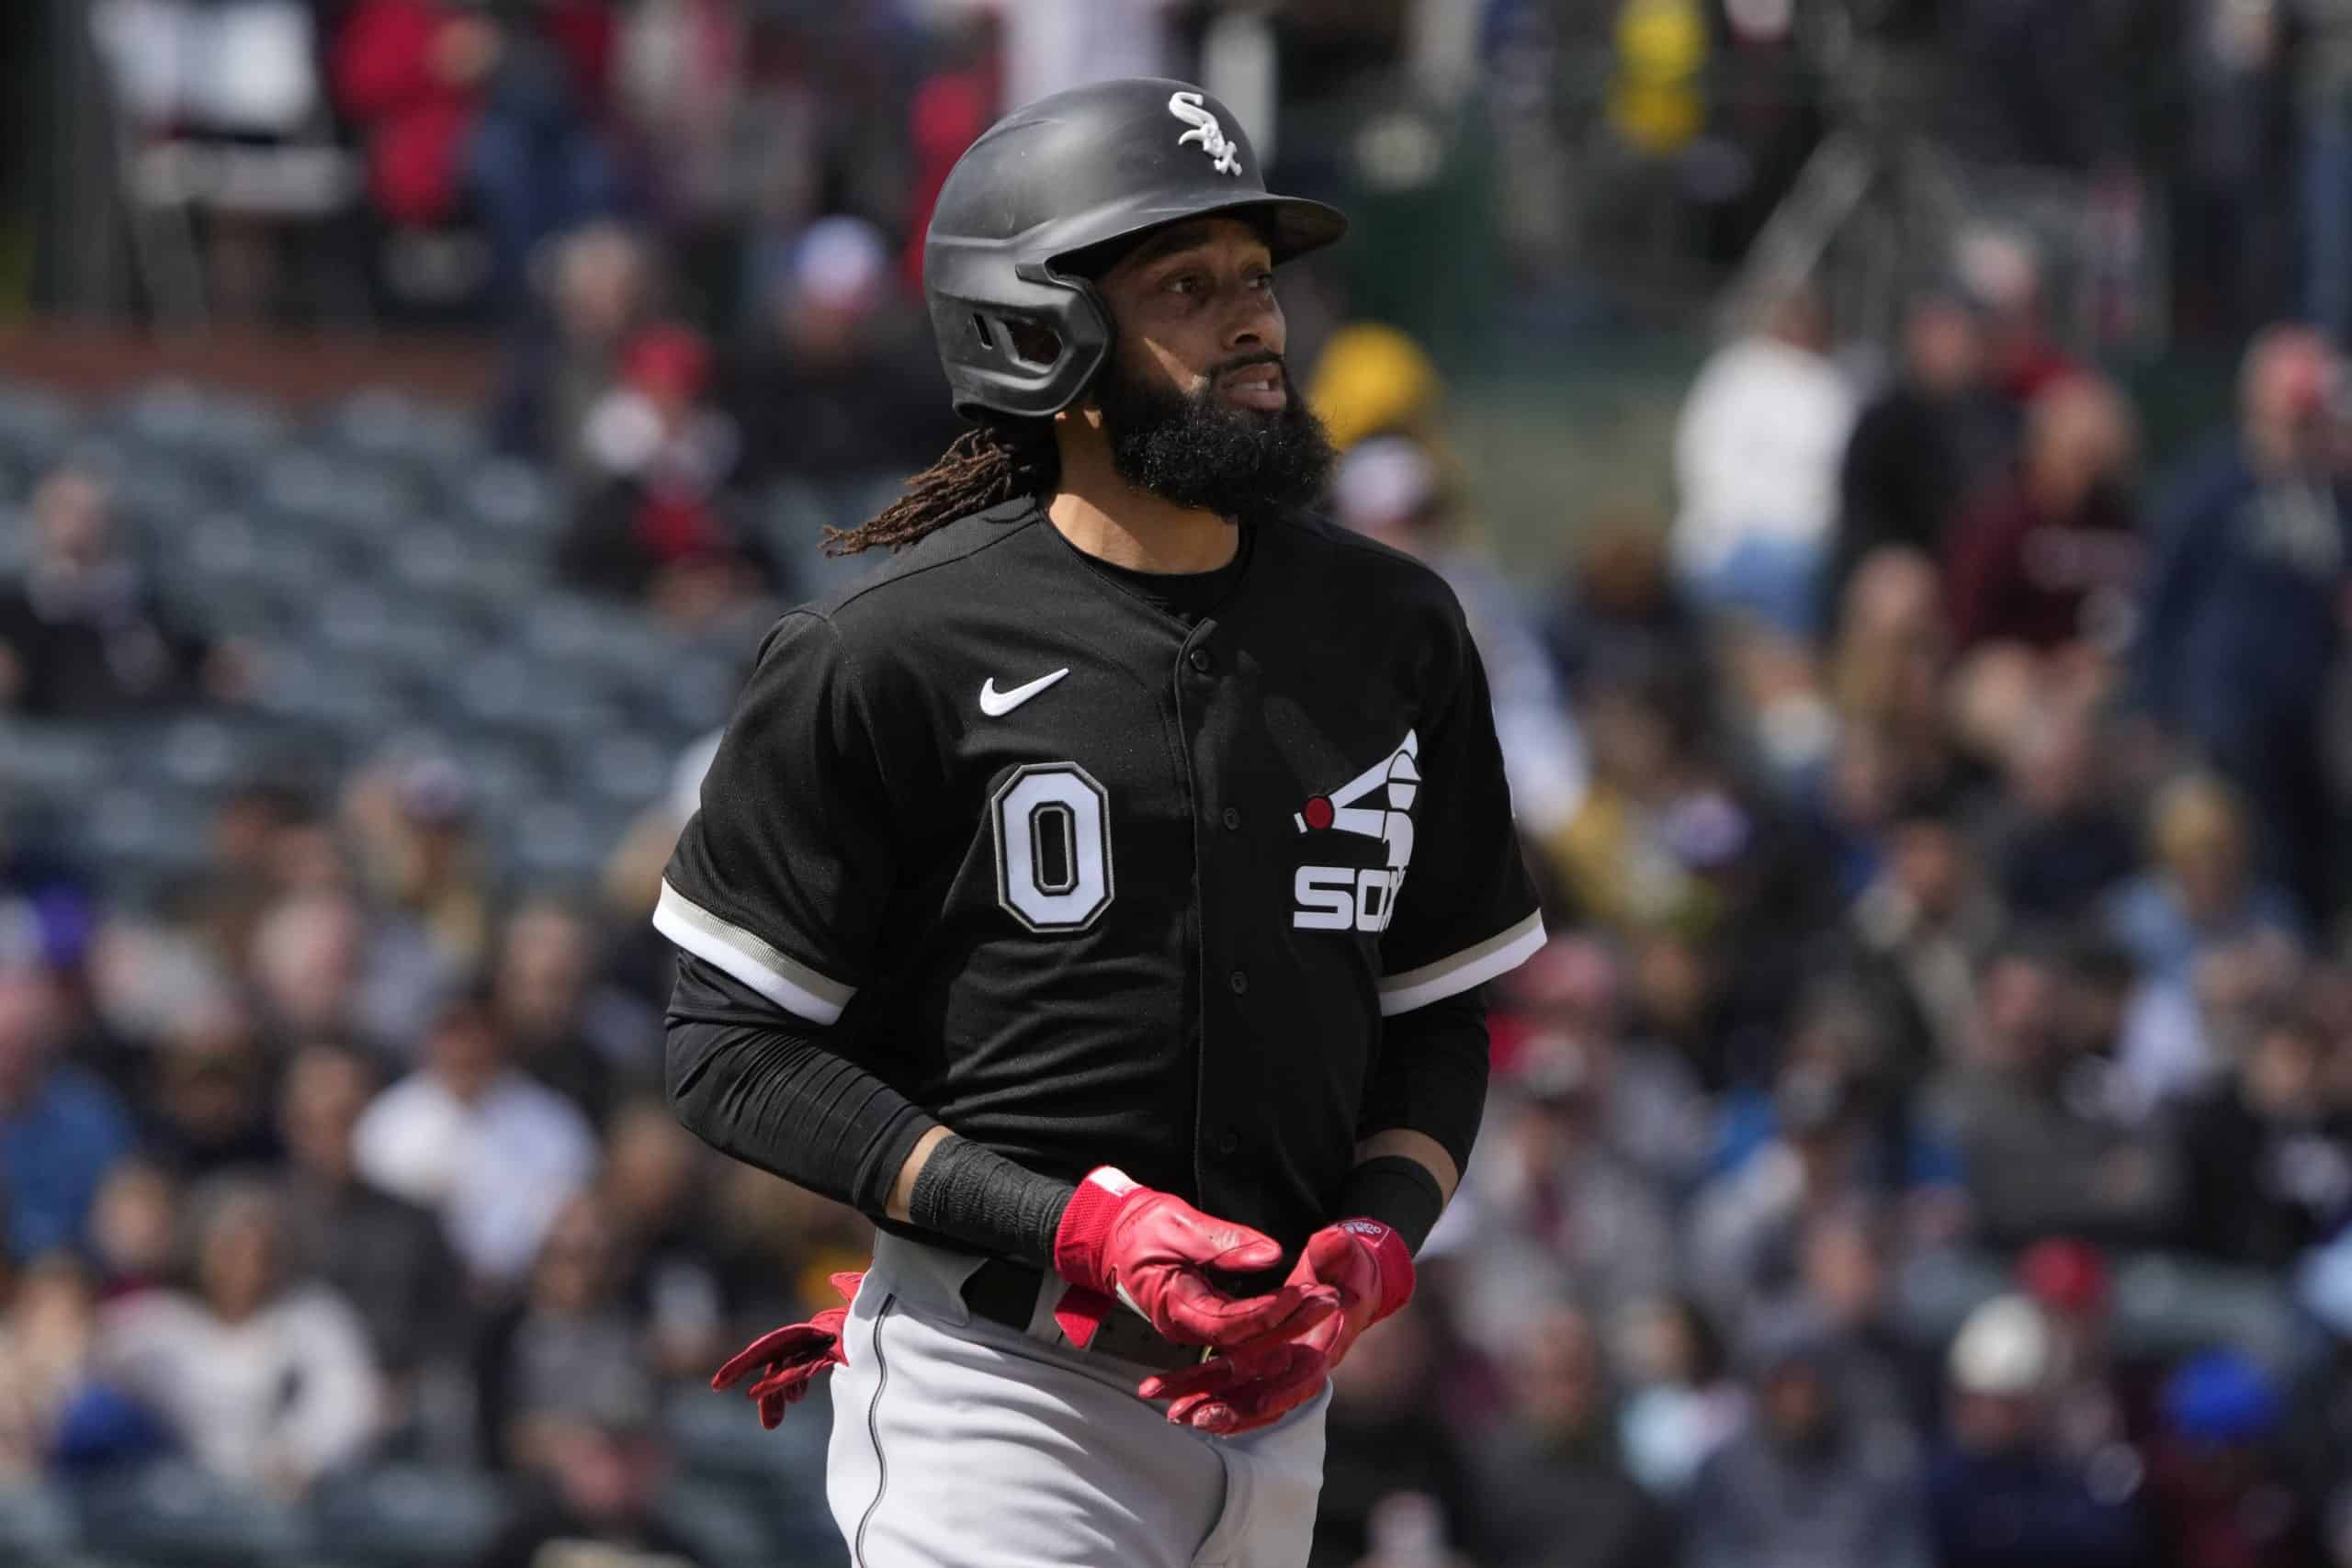 They said it: White Sox personnel talk about promising first half of season